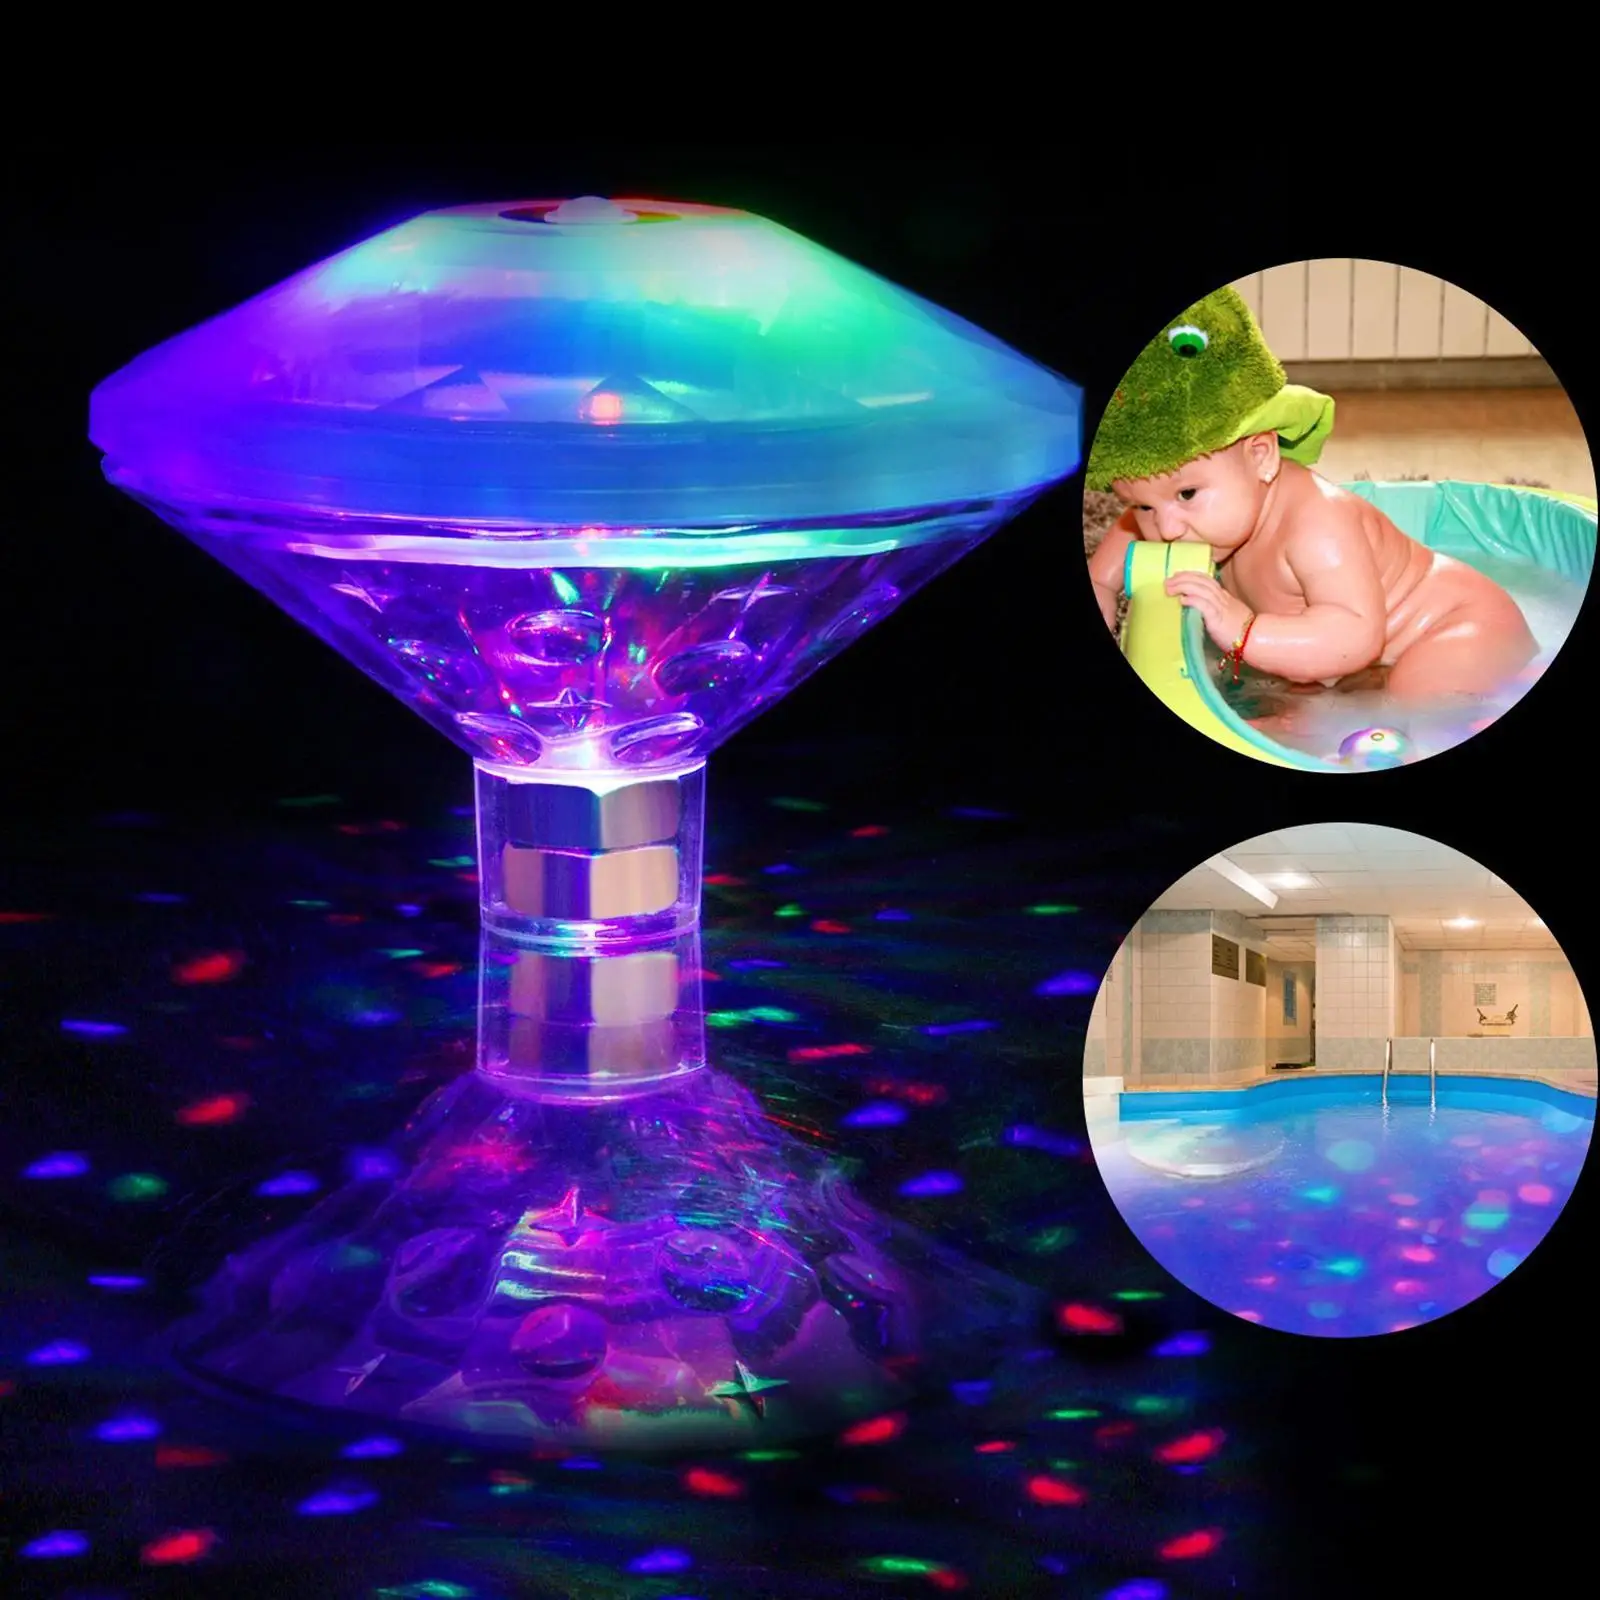 Floating LED Pool Light Pond Lamp Multicolor RGB Underwater Waterproof Submersible Lights for Hot Tub Garden Decor Home Outdoor